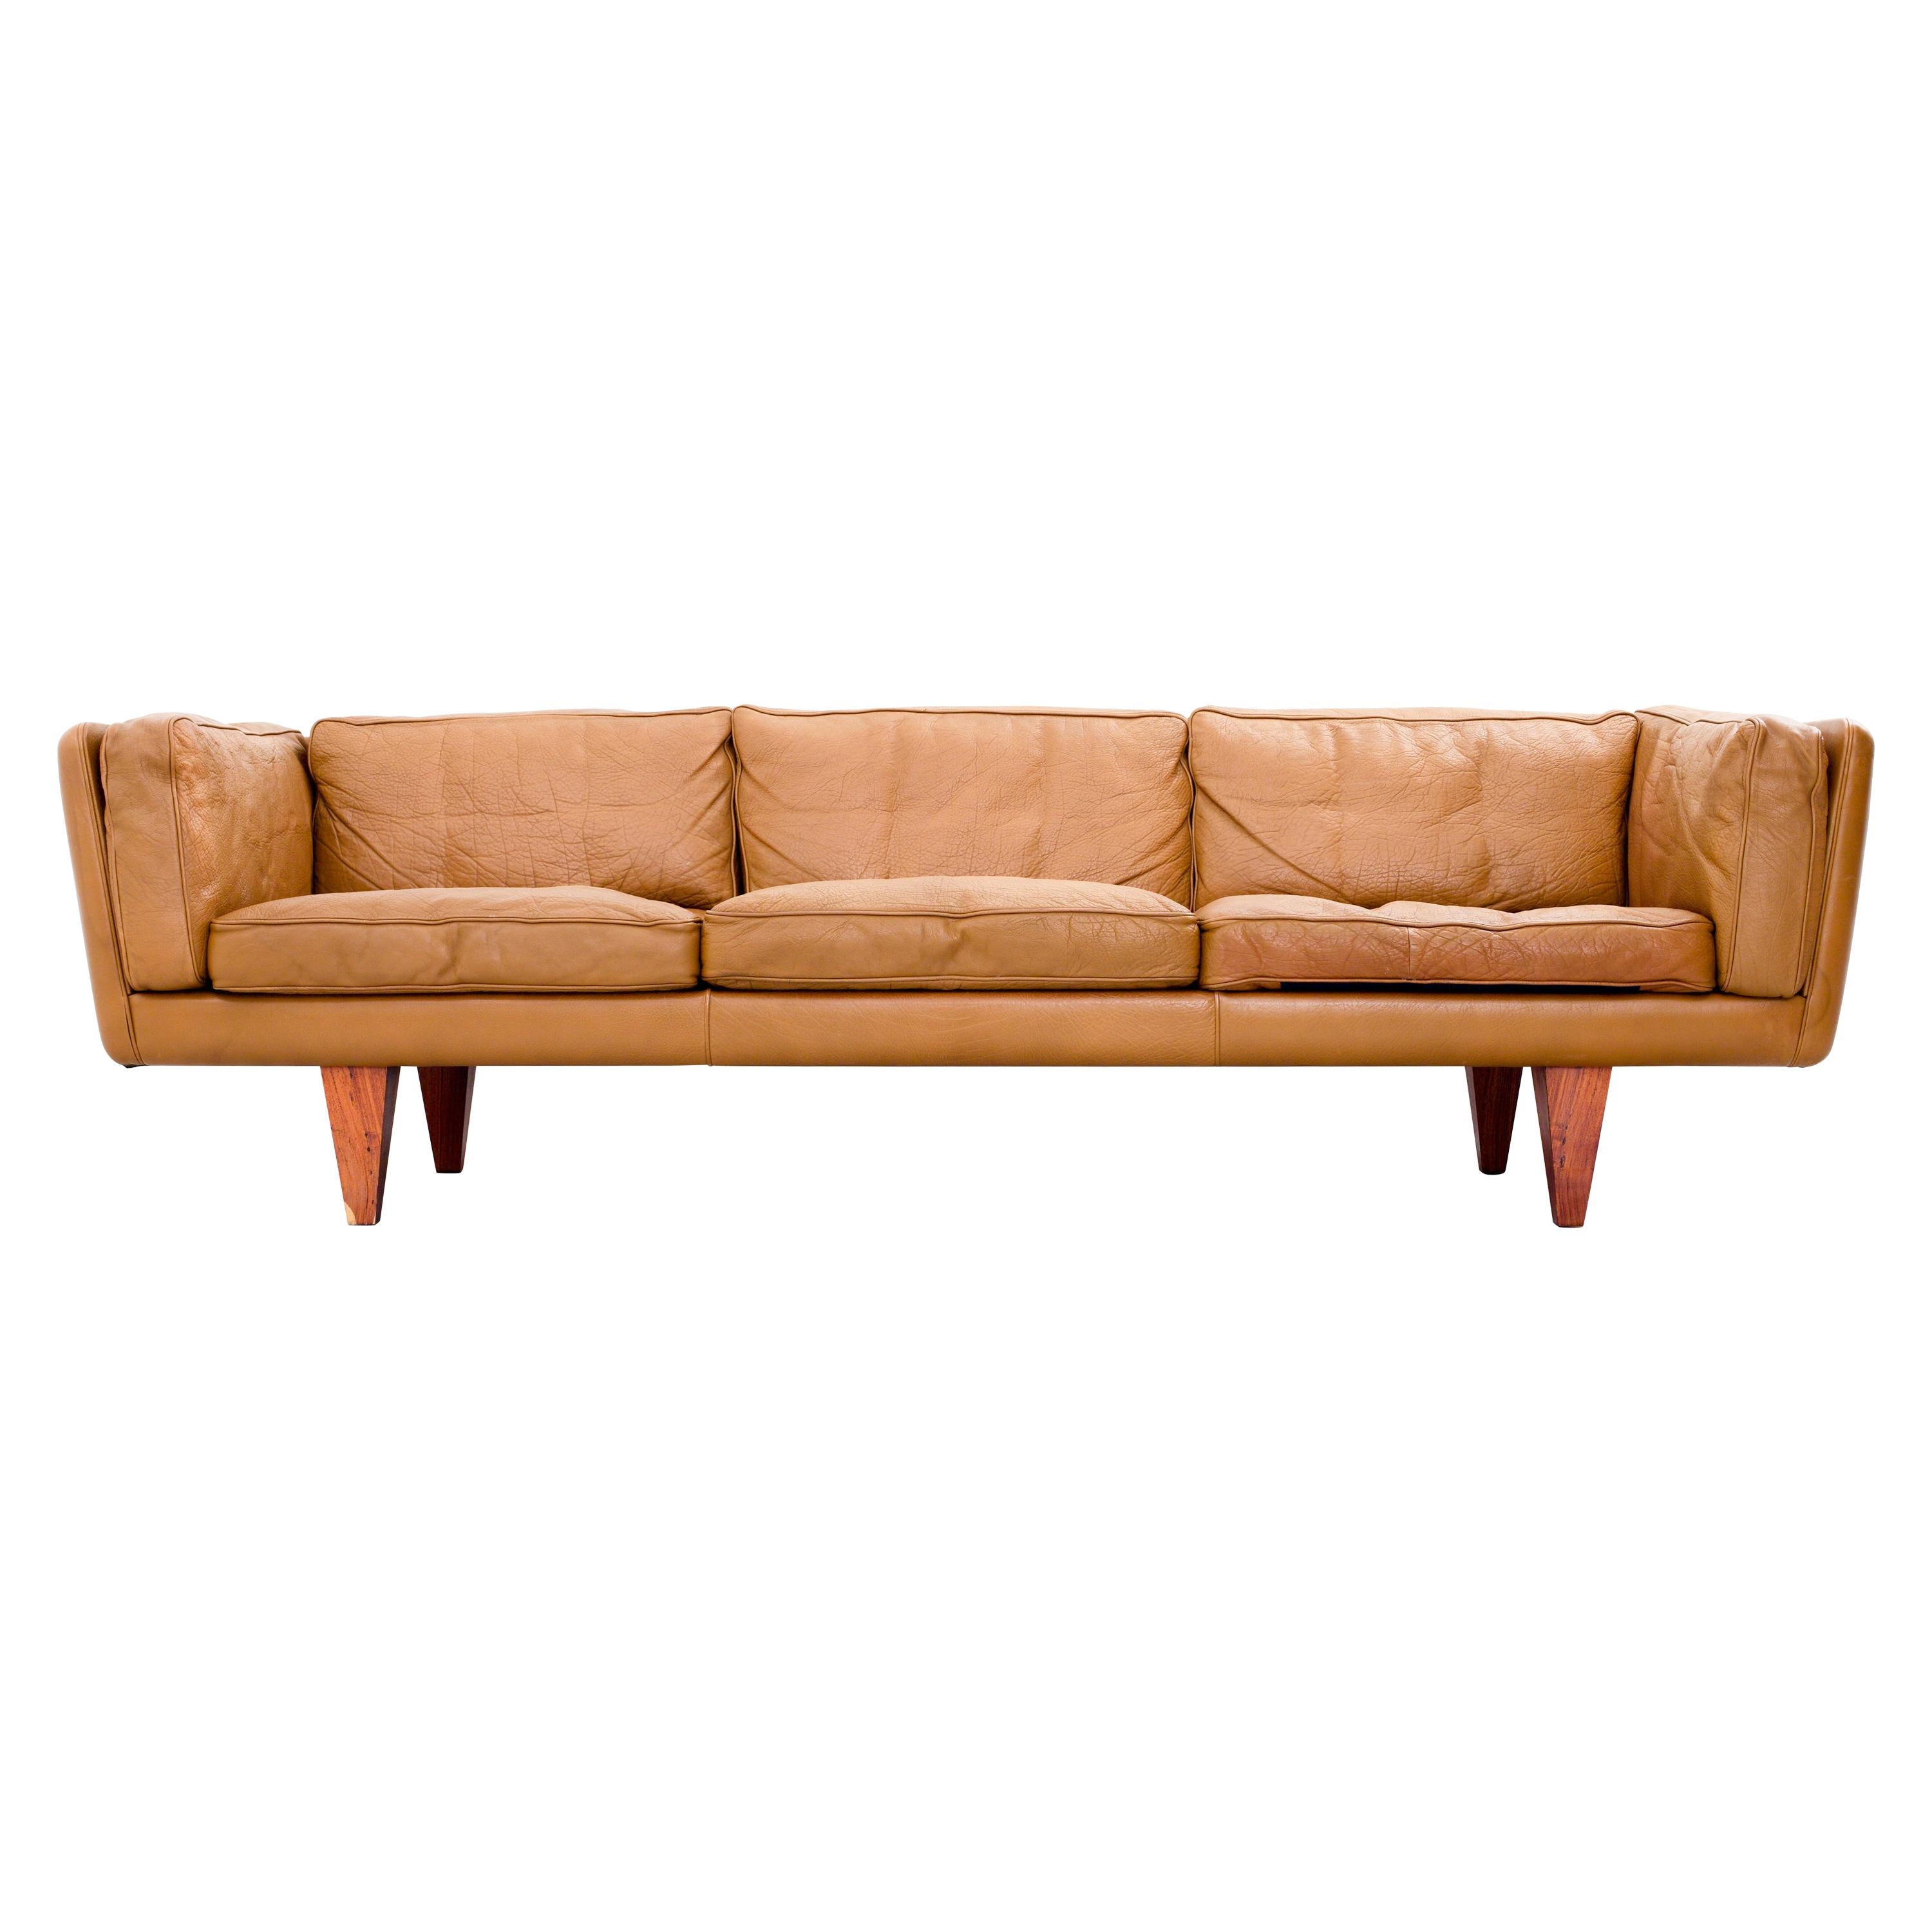 Illum Wikkelsø Three-seat ‘V11’ sofa in cognac coloured leather and wooden pyramid legs. 

Perfect proportions is what makes this V11 sofa by Illum Wikkelsø so special. The  leather runs all the way through, also at the back, making this sofa a